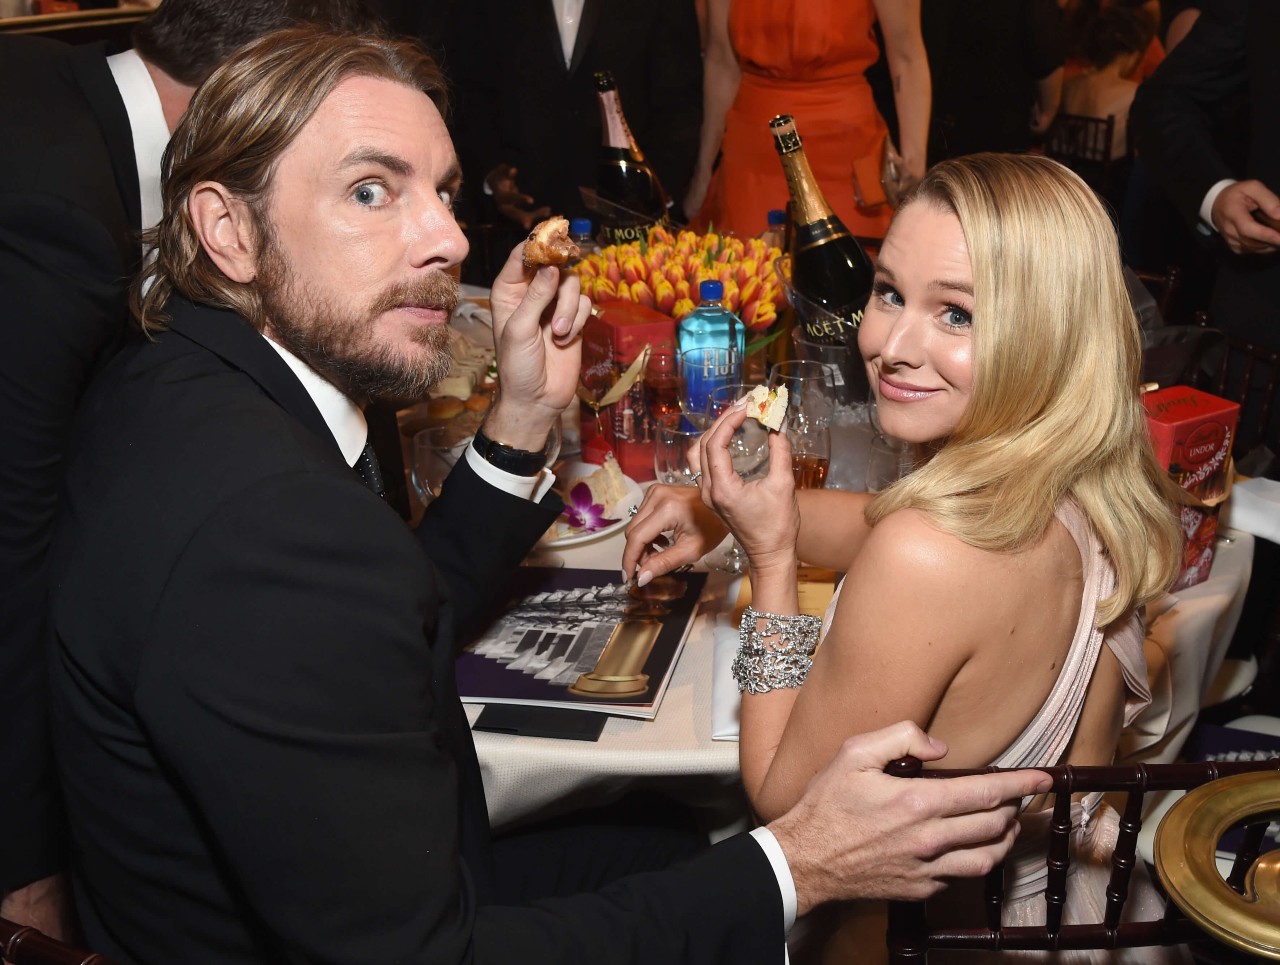 Dax Shepard and Kristen Bell eat a meal together.